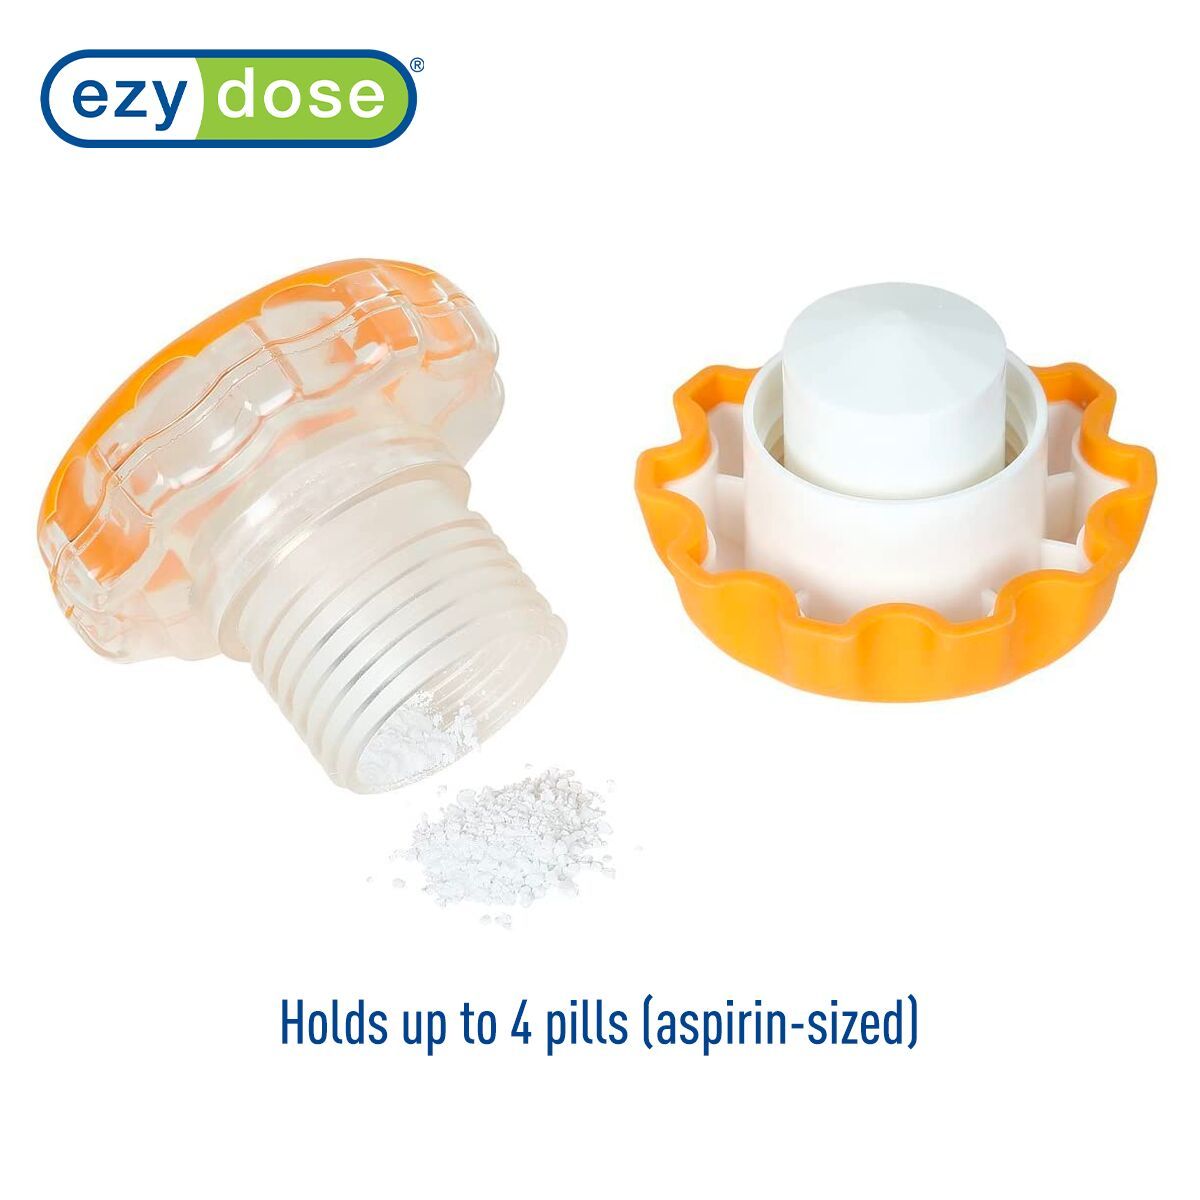 The pill crusher storage compartment can hold up to 4 aspirin-sized pills